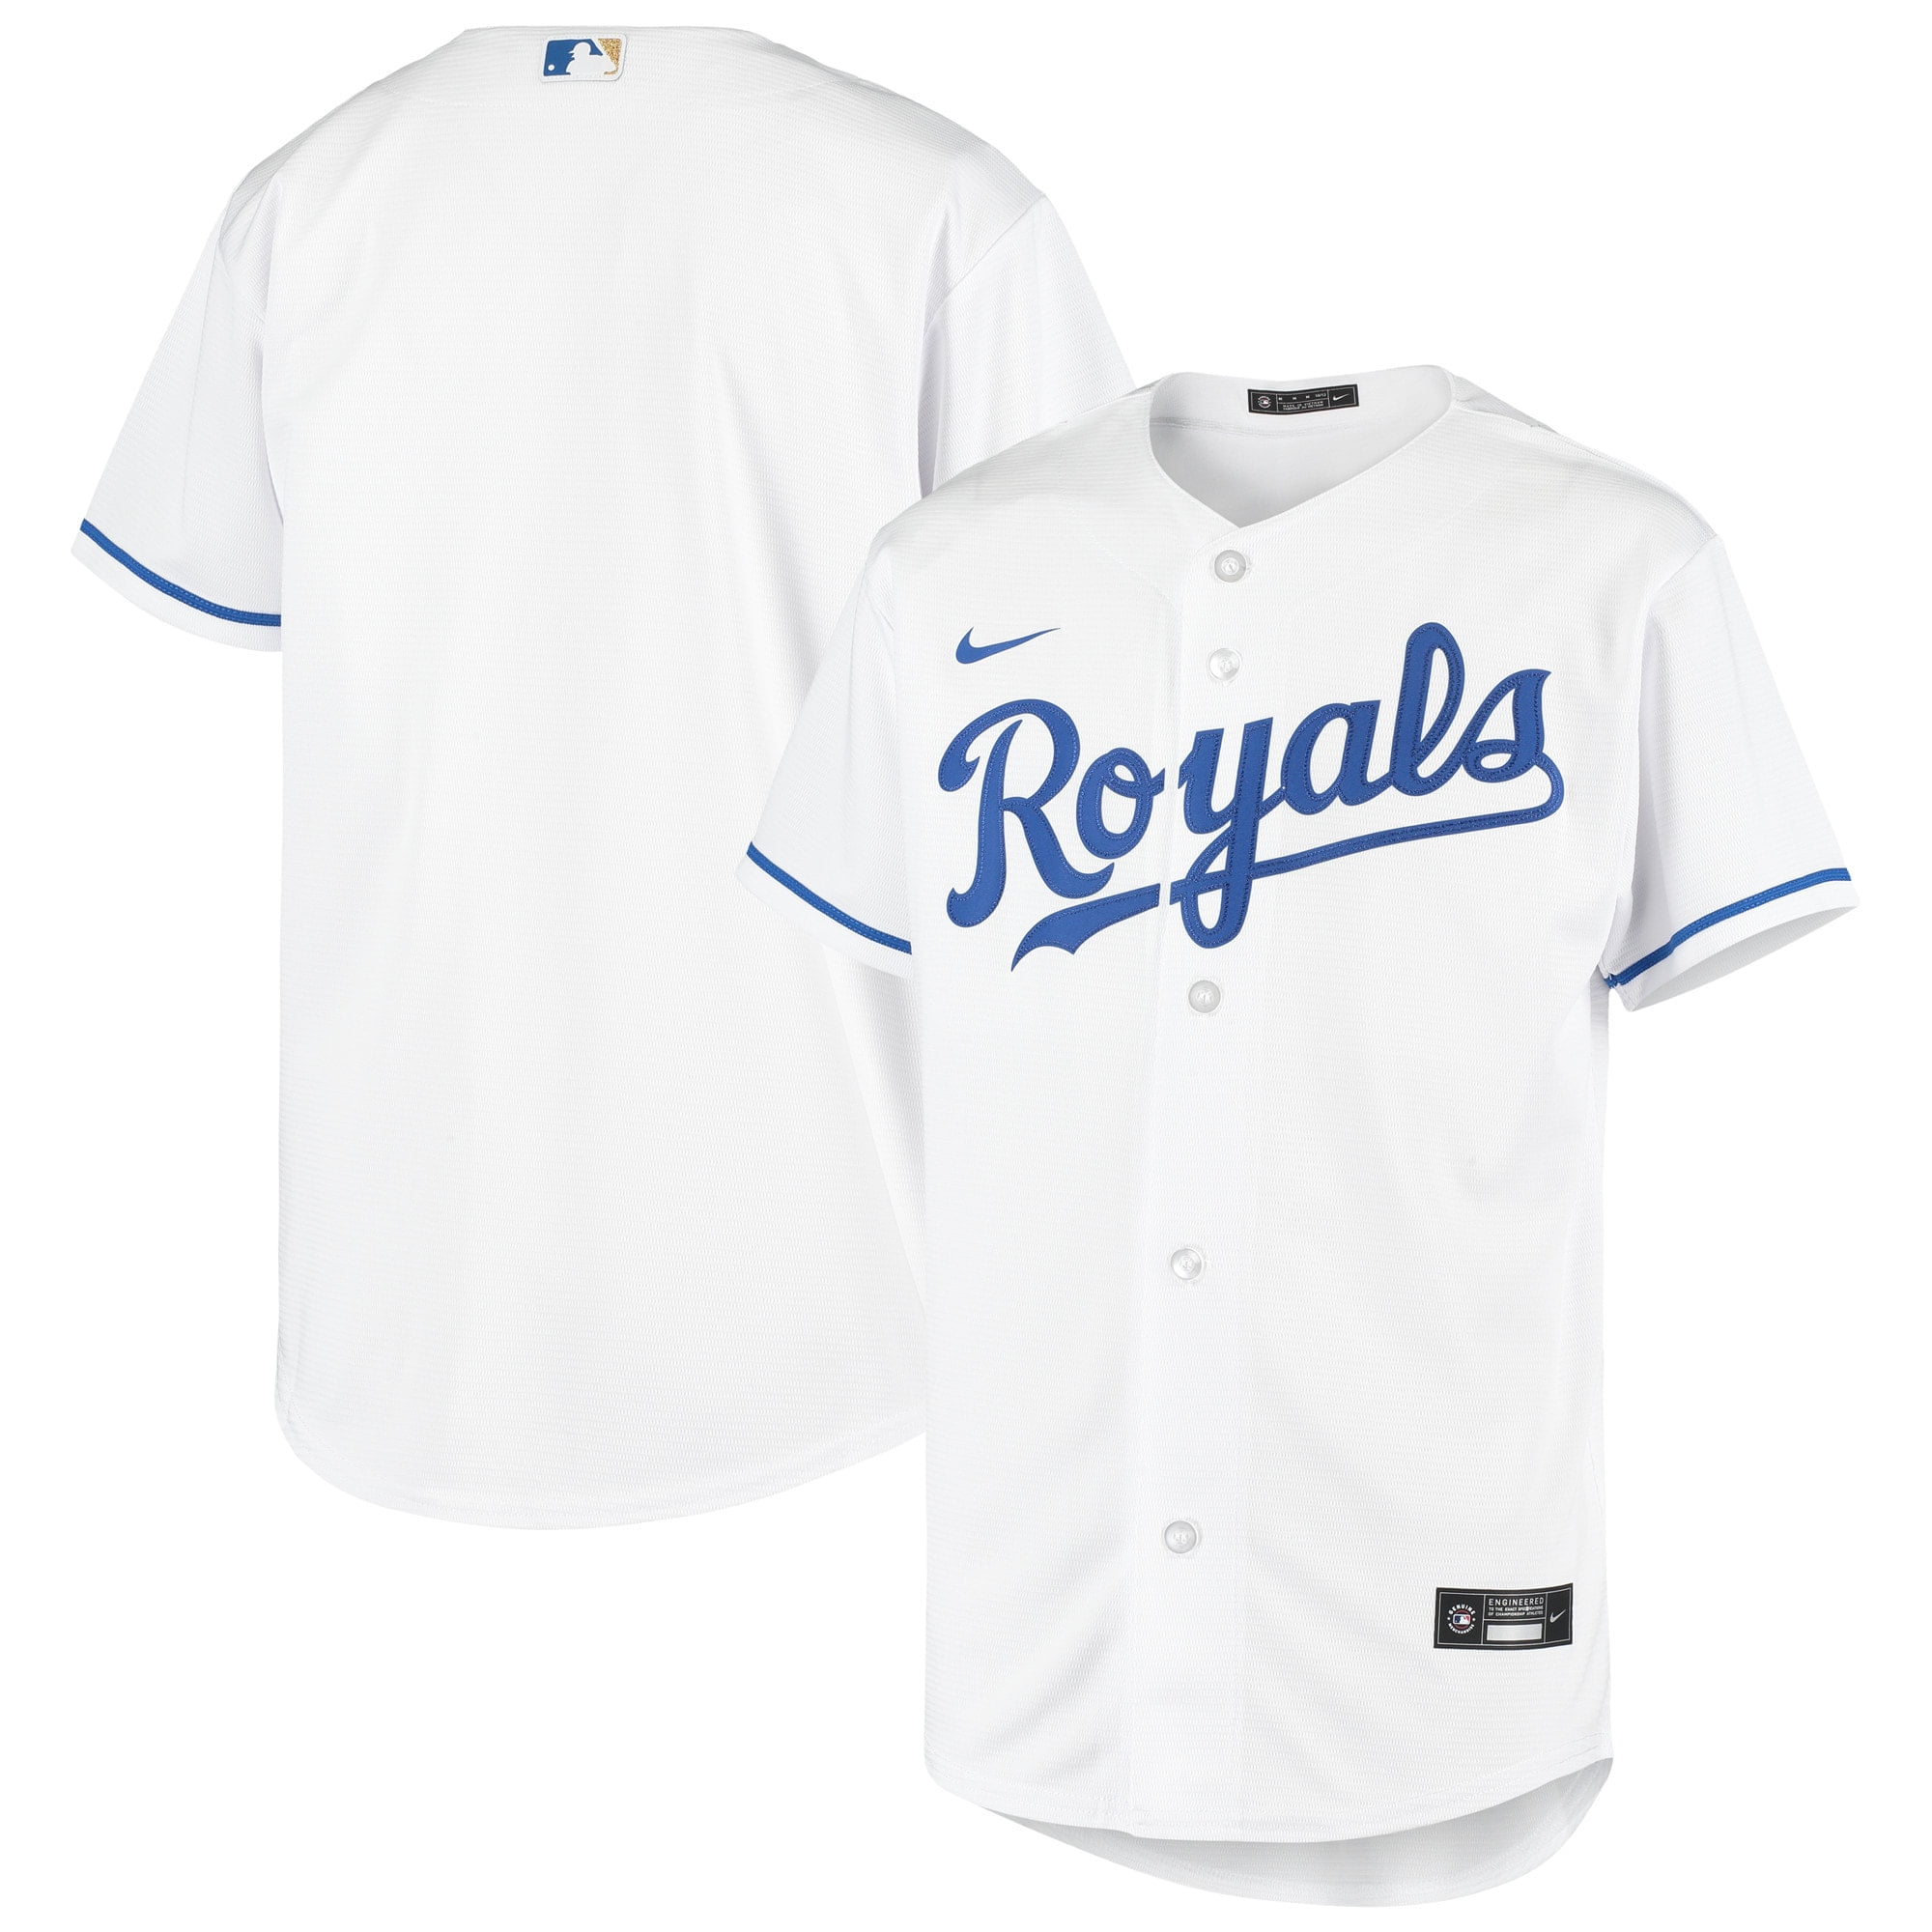 royals opening day jersey